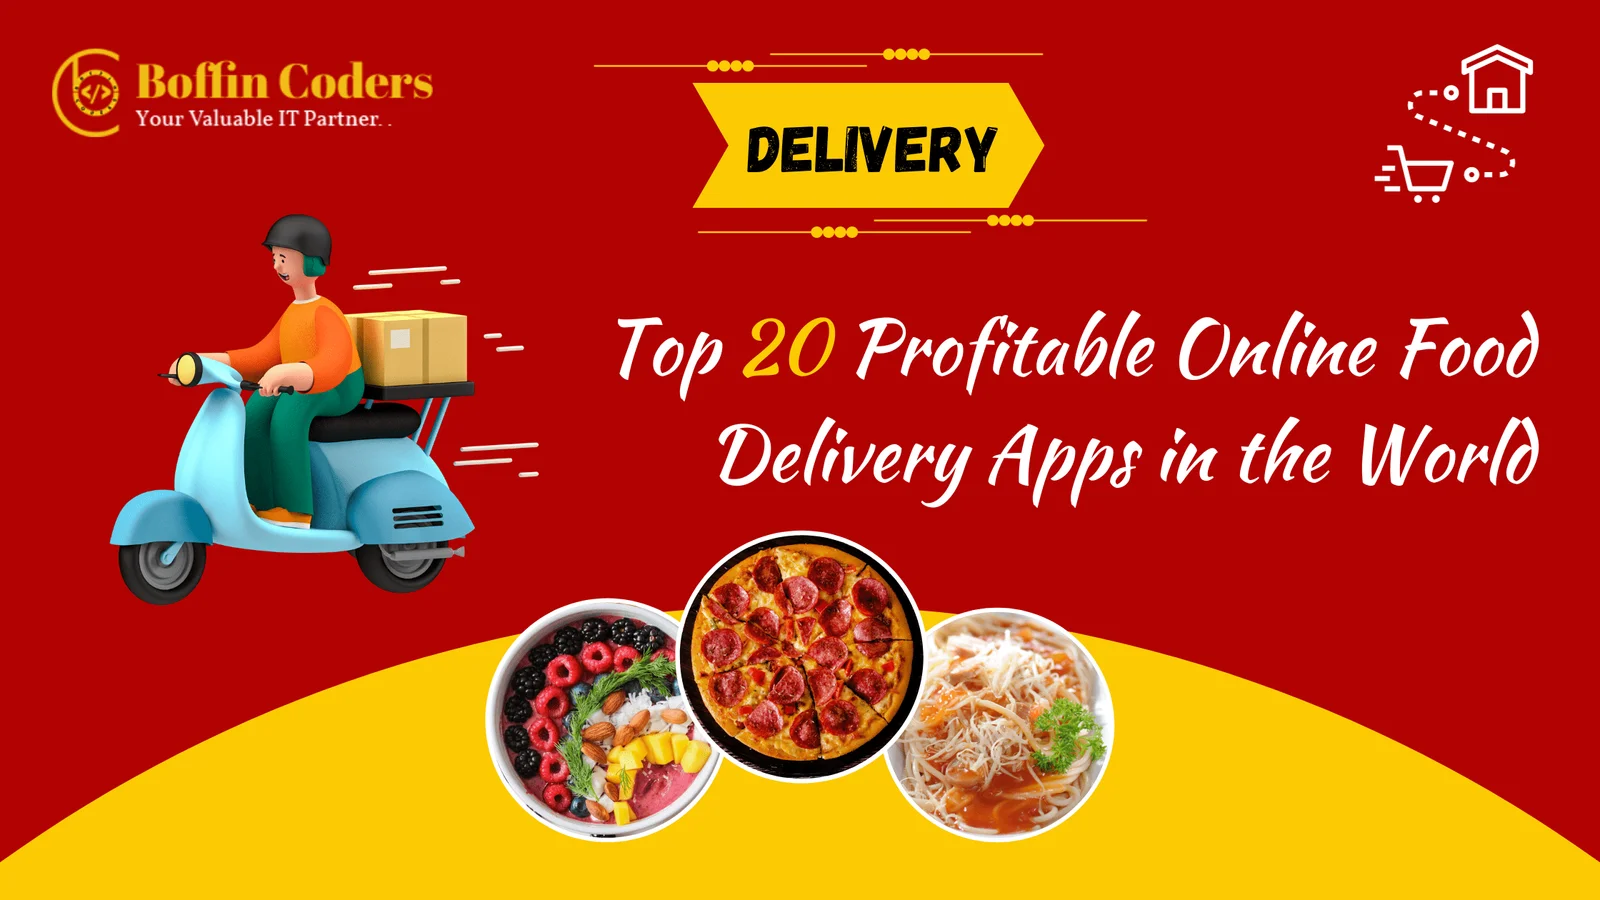 Top-20-Profitable-Online-Food-Delivery-Apps-in-the-World